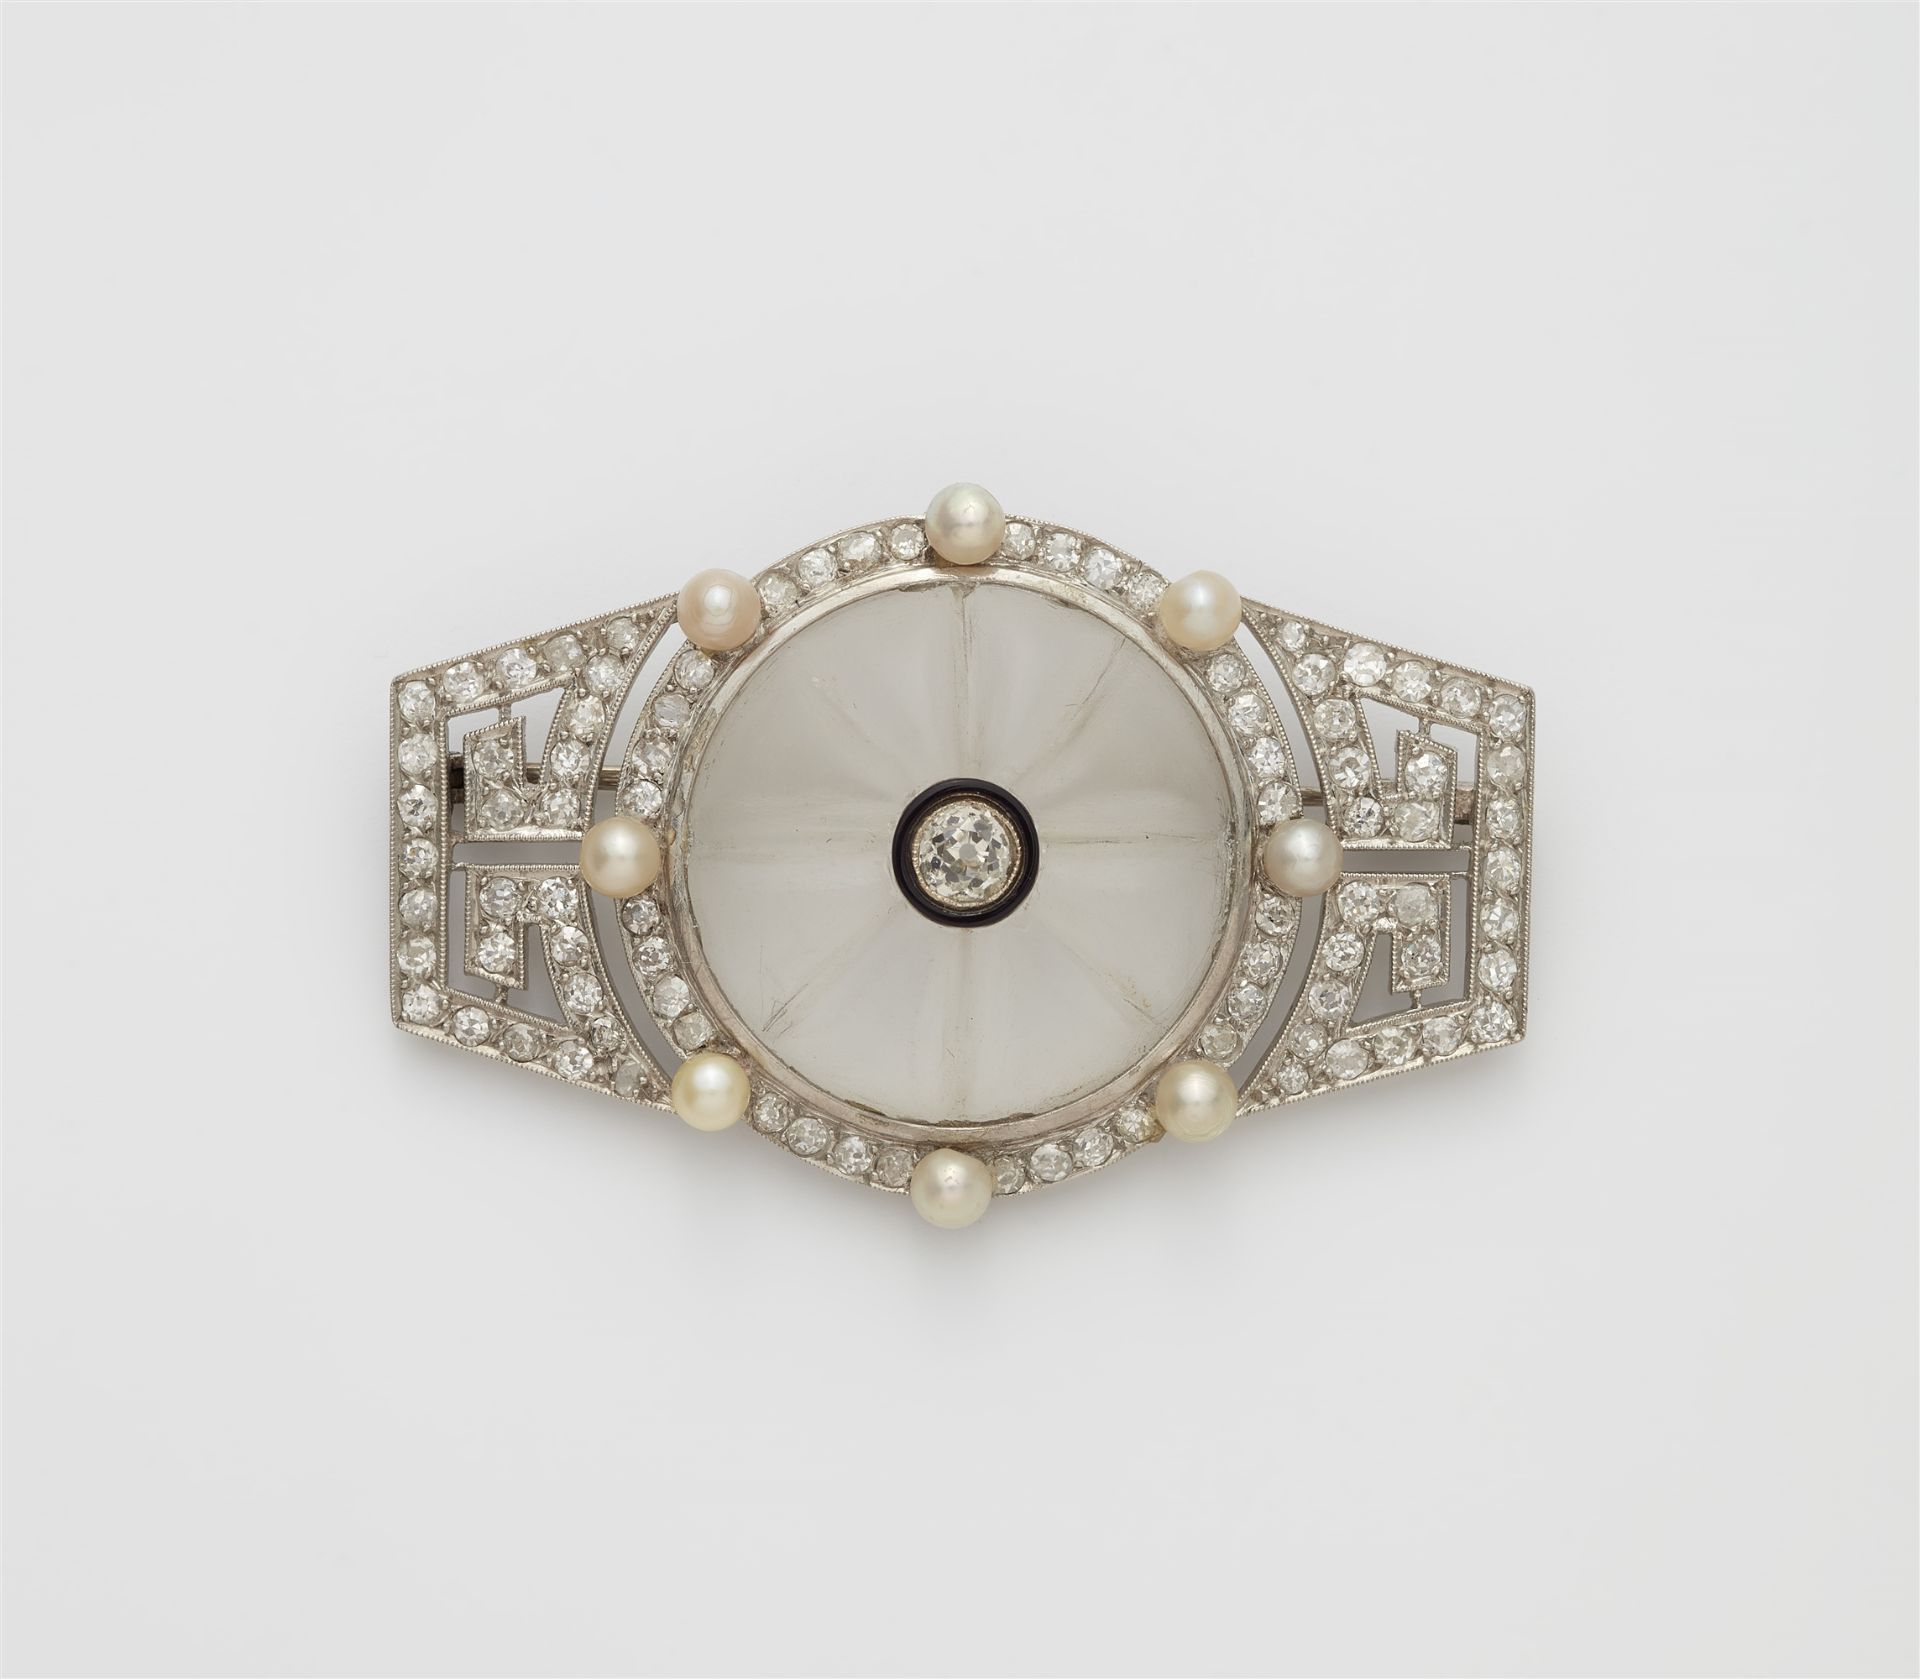 A French Art Déco platinum enamel diamond and rock crystal brooch.